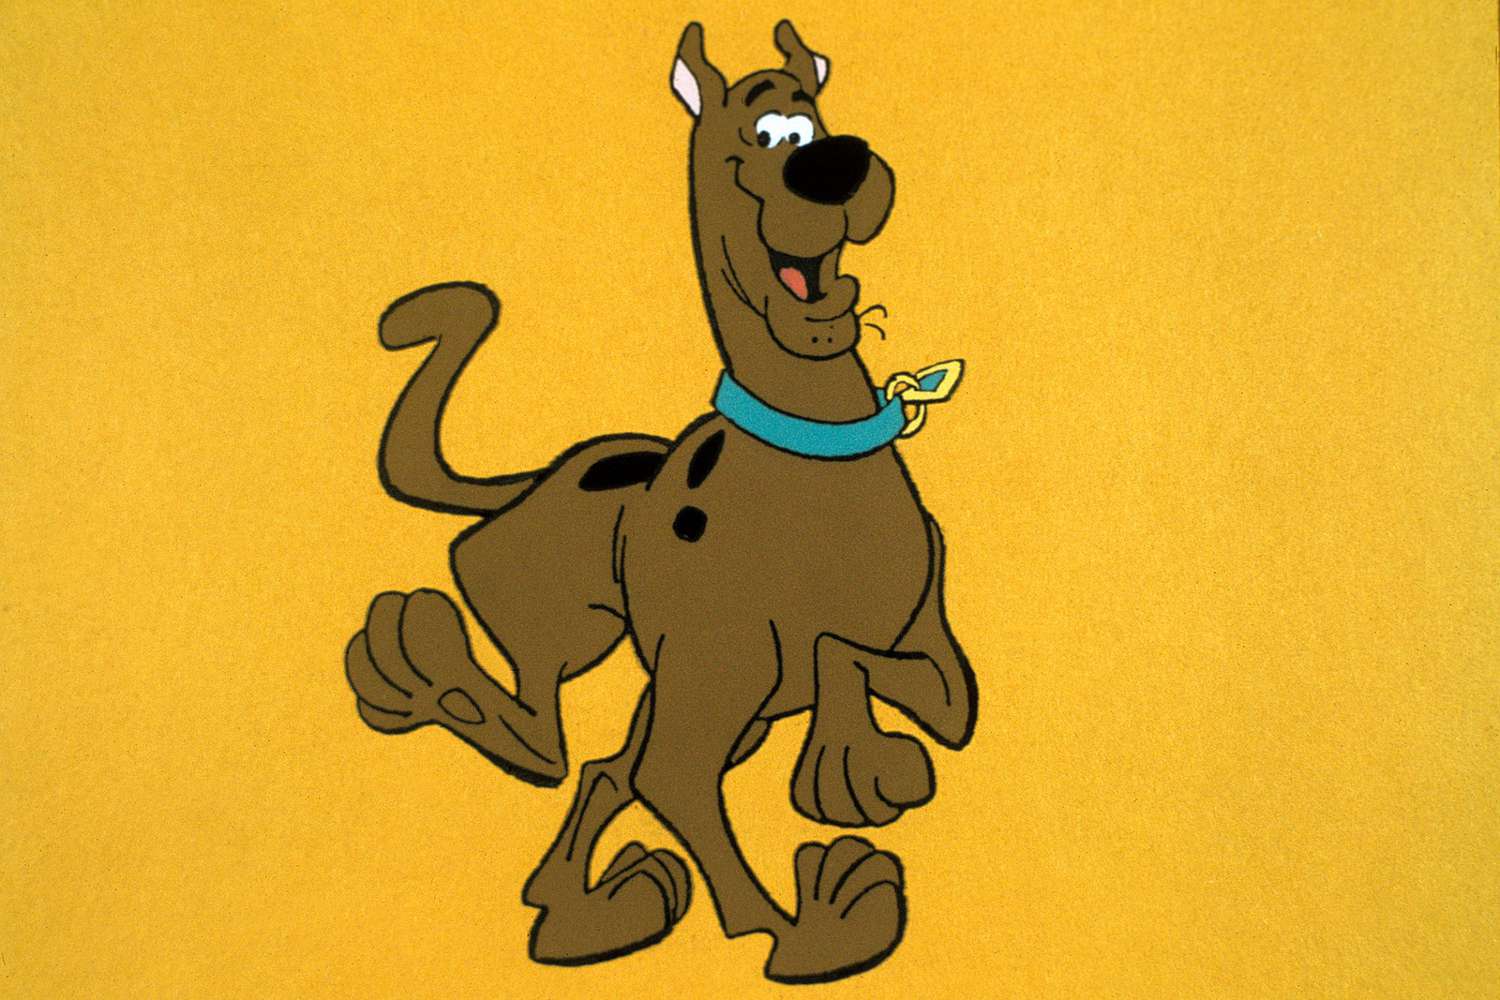 cartoon dog name scooby from scooby doo on a yellow background